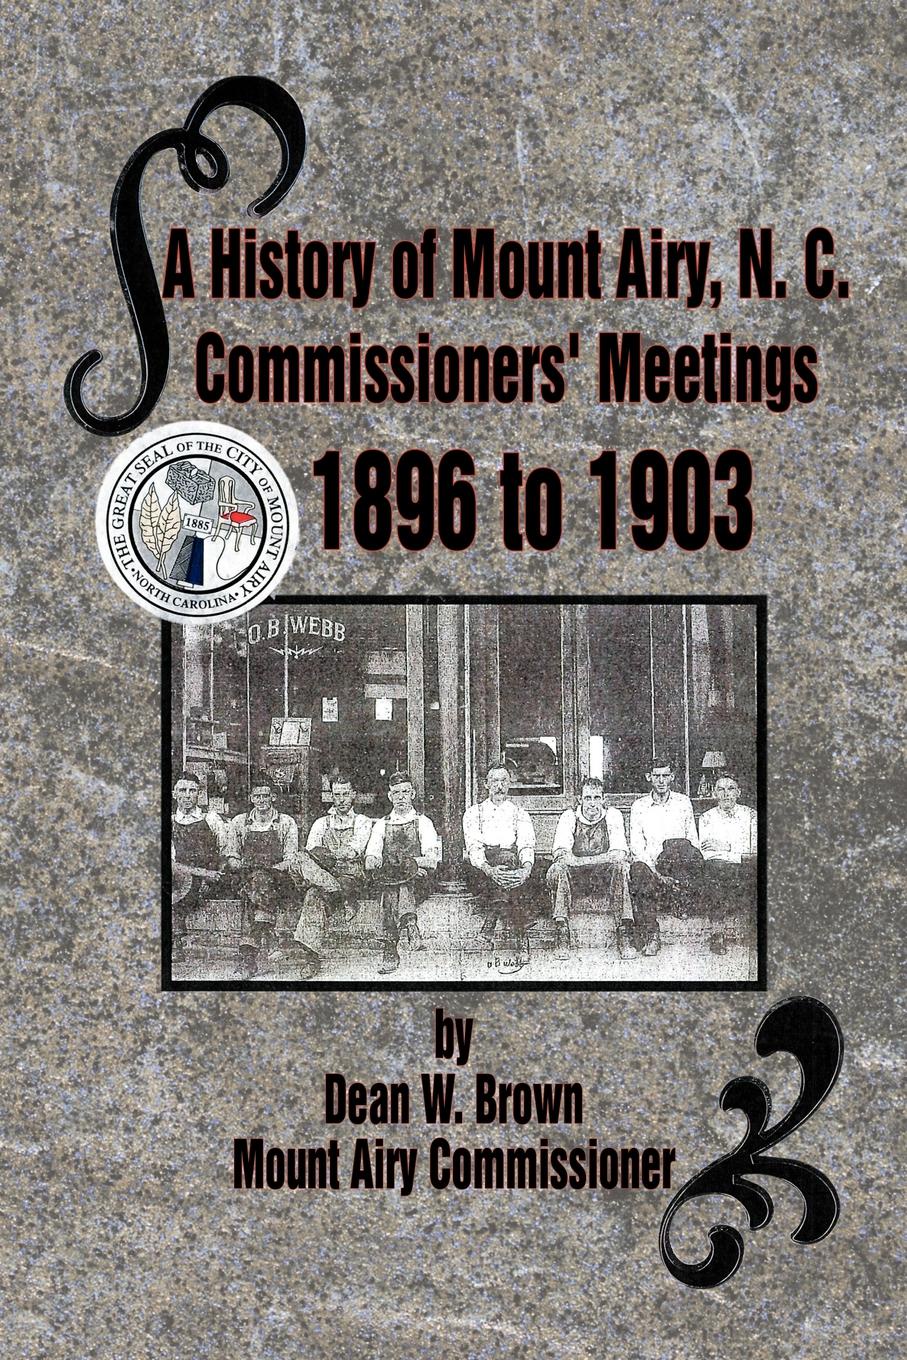 A History of Mount Airy, N. C. Commissioners` Meetings 1896 to 1903. Commissioners` Meetings 1896 to 1903